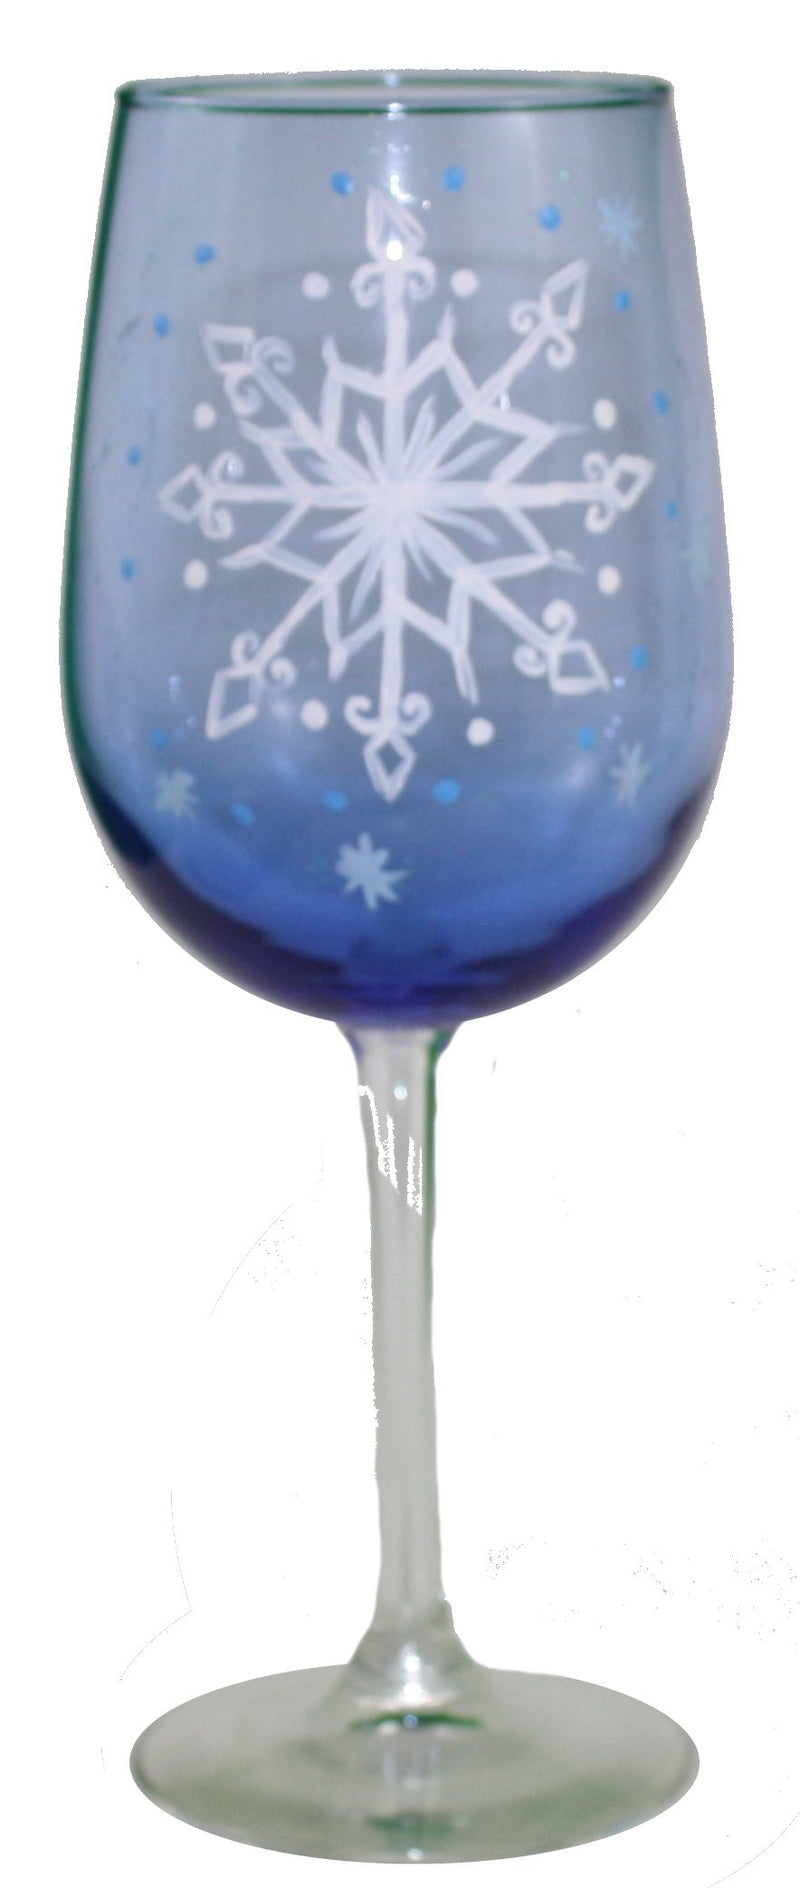 Whimsy Inspired Handpainted Stem Wine Glass (Blue Snowflake) - The Country Christmas Loft